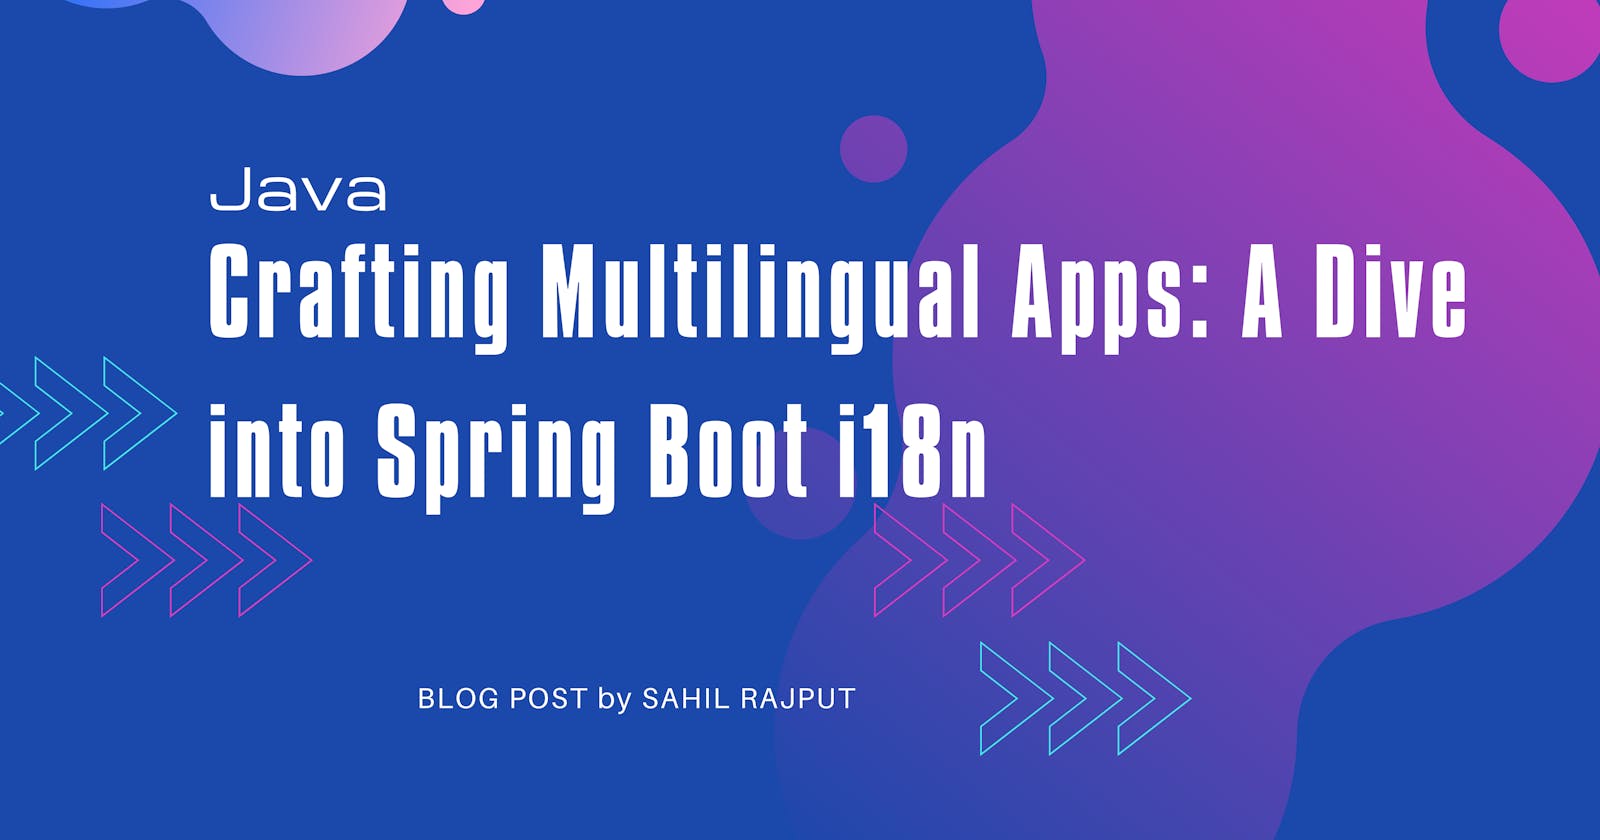 Crafting Multilingual Apps: A Dive into Spring Boot i18n